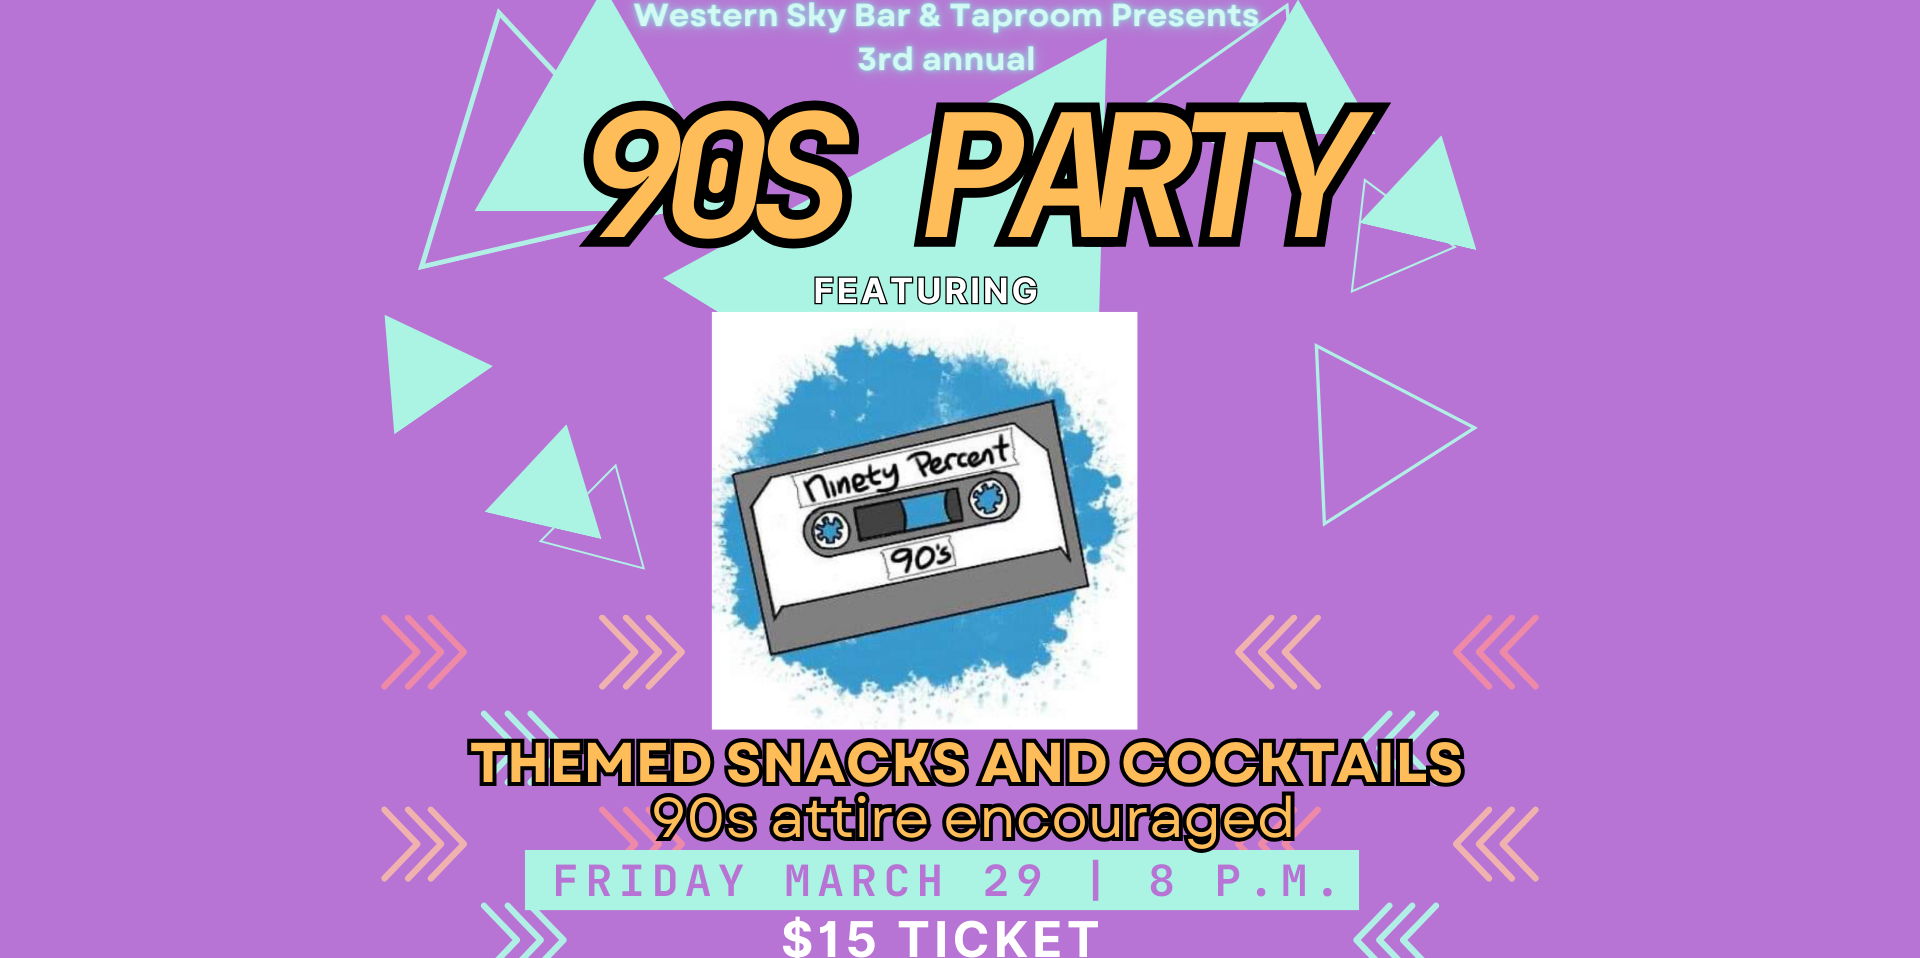 90s Party at Western Sky Featuring Ninety Percent 90s promotional image